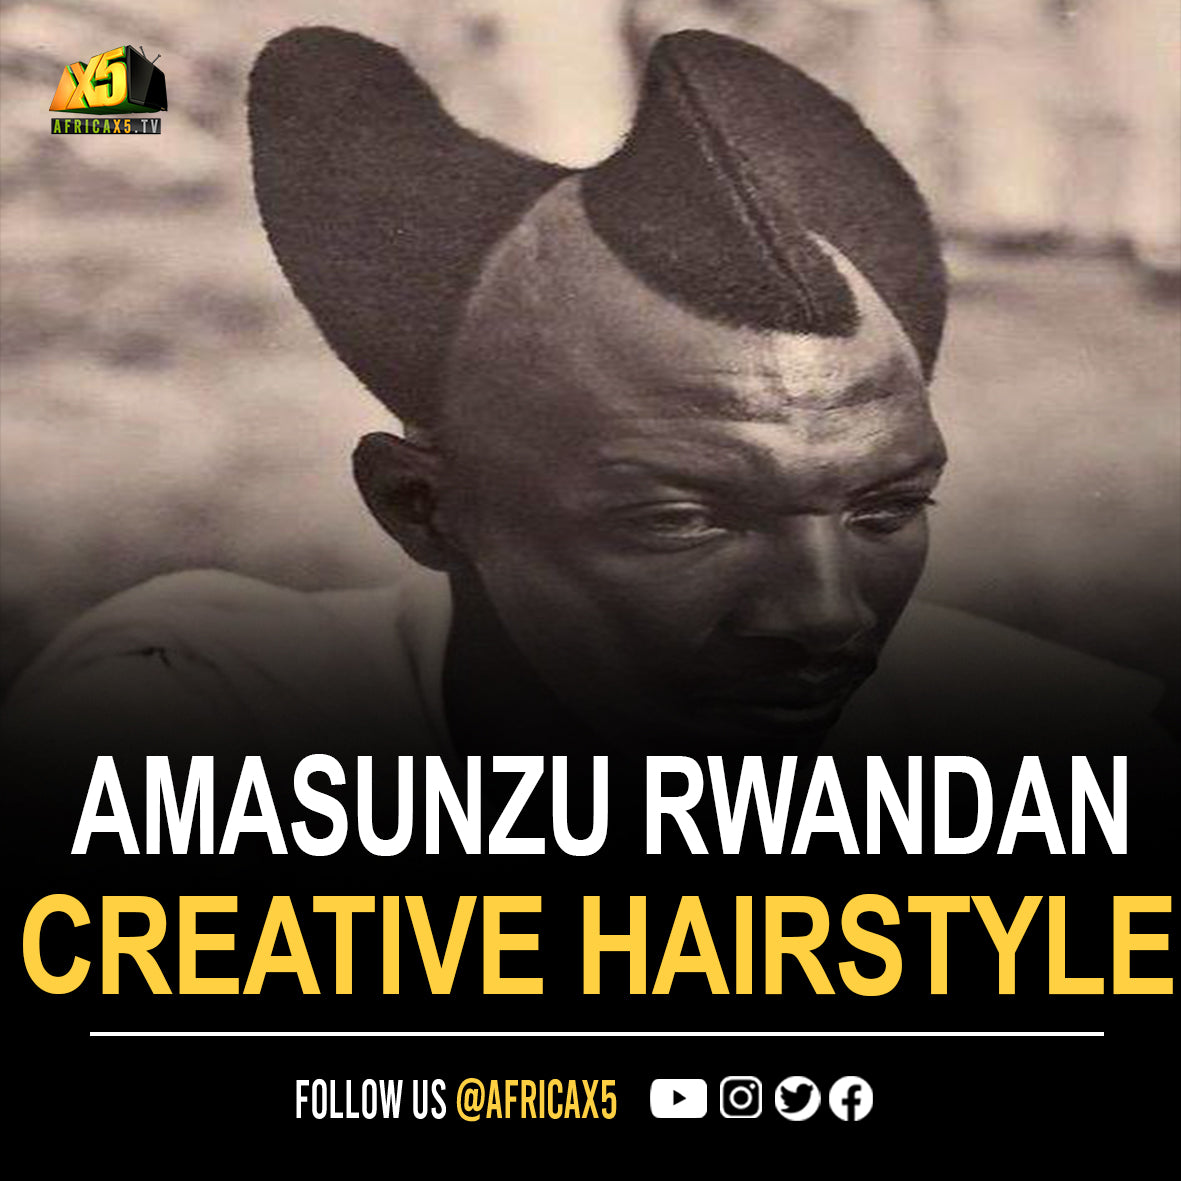 The Most Unique And Creative Hairstyle From The 1920. The Traditional Rwandan Hairstyle